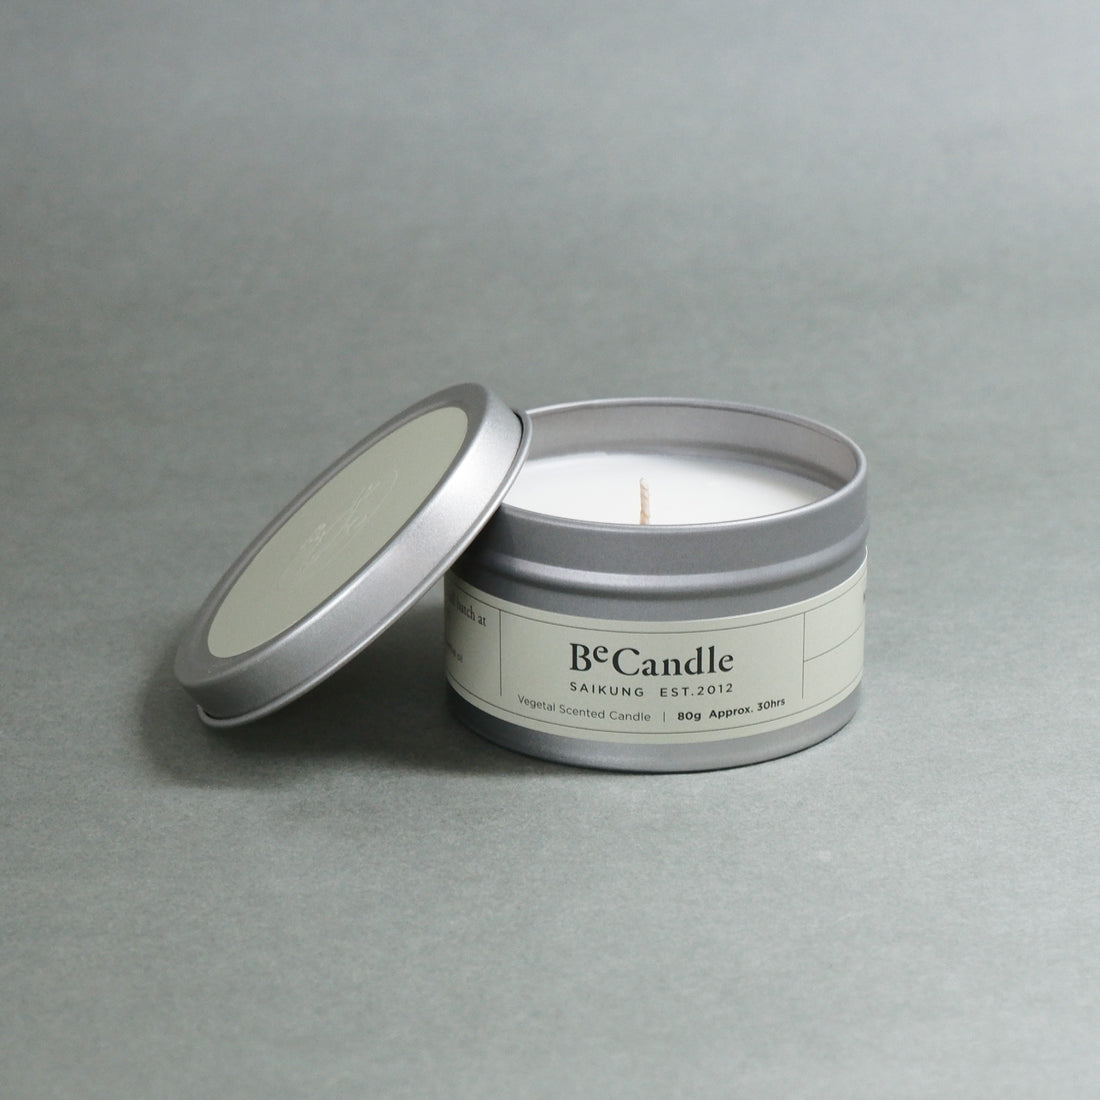 becandle_travel_candle_tin_can_80g_88_amberwood_scented_candle